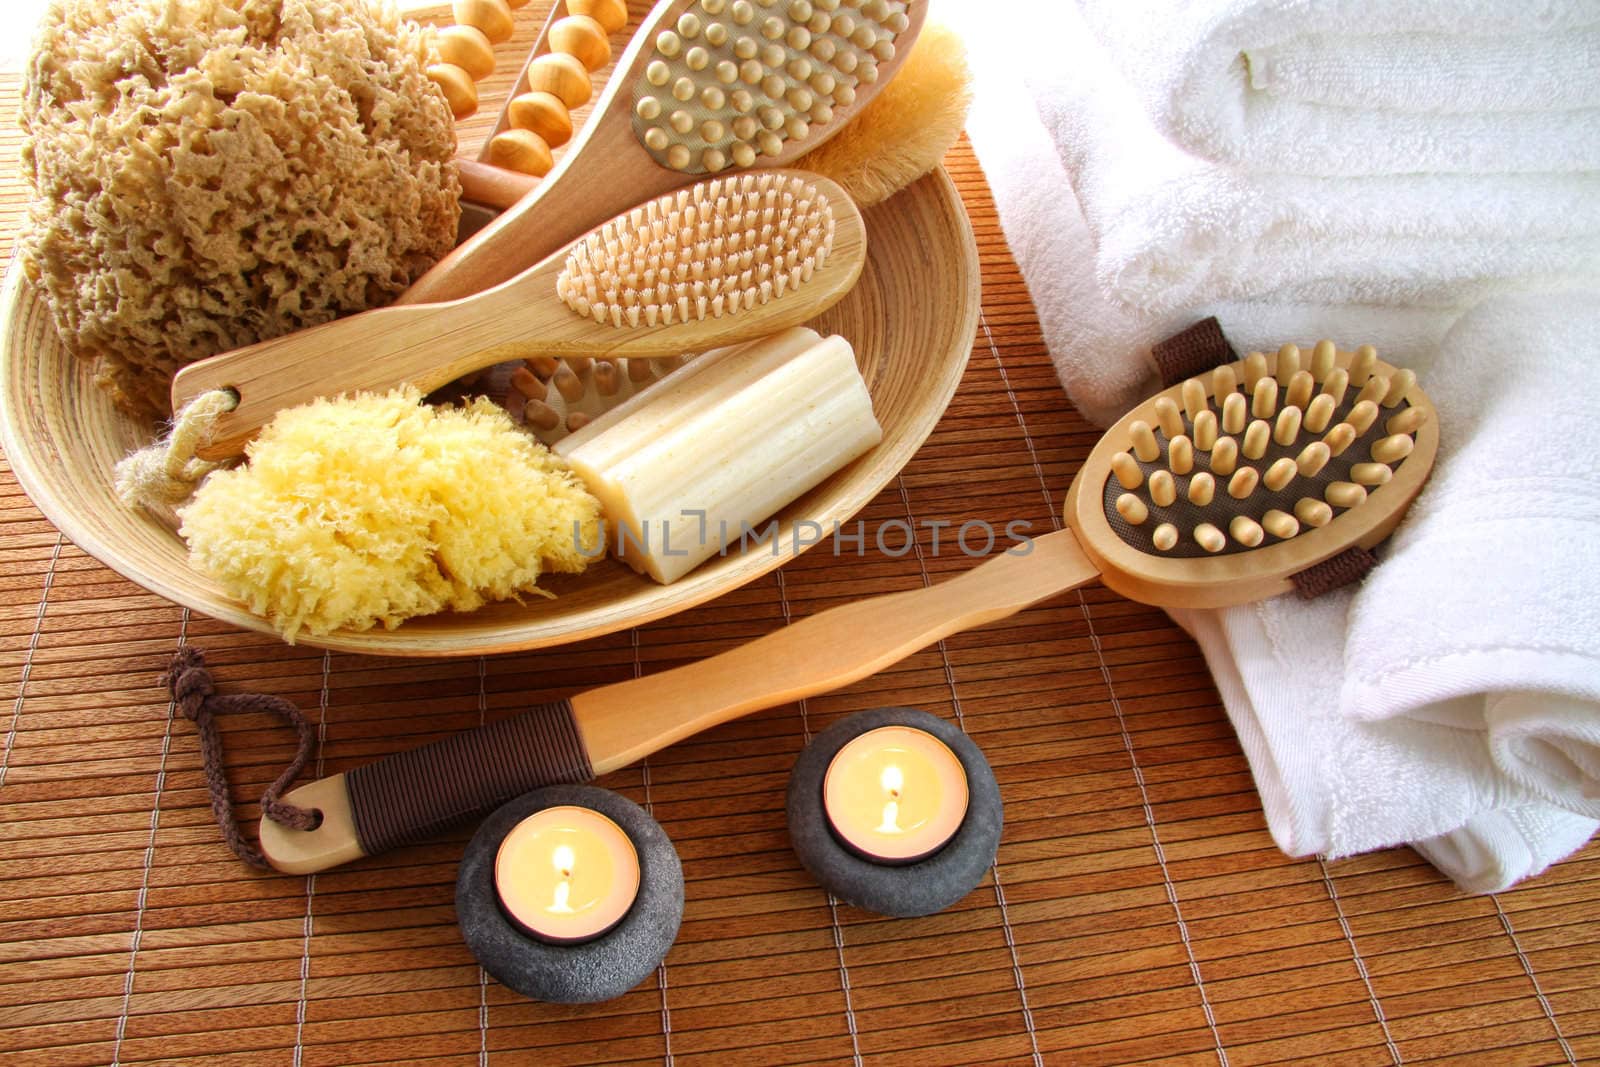 Assortment of spa brushes, sponges and soap  on bamboo mat 